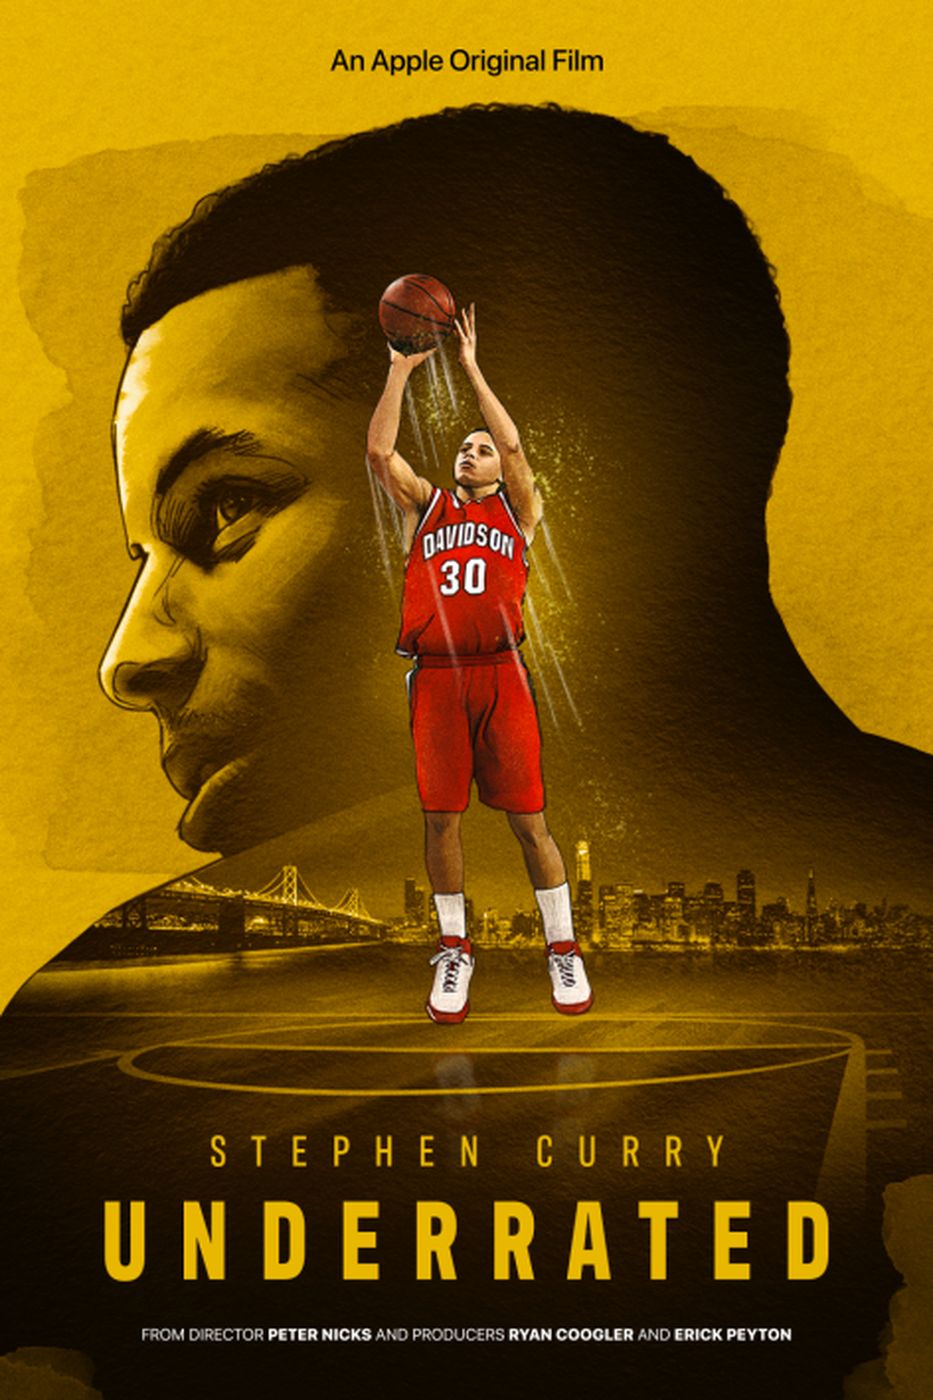 Underrated: the documentary on NBA champion Stephen Curry is available on Apple TV+